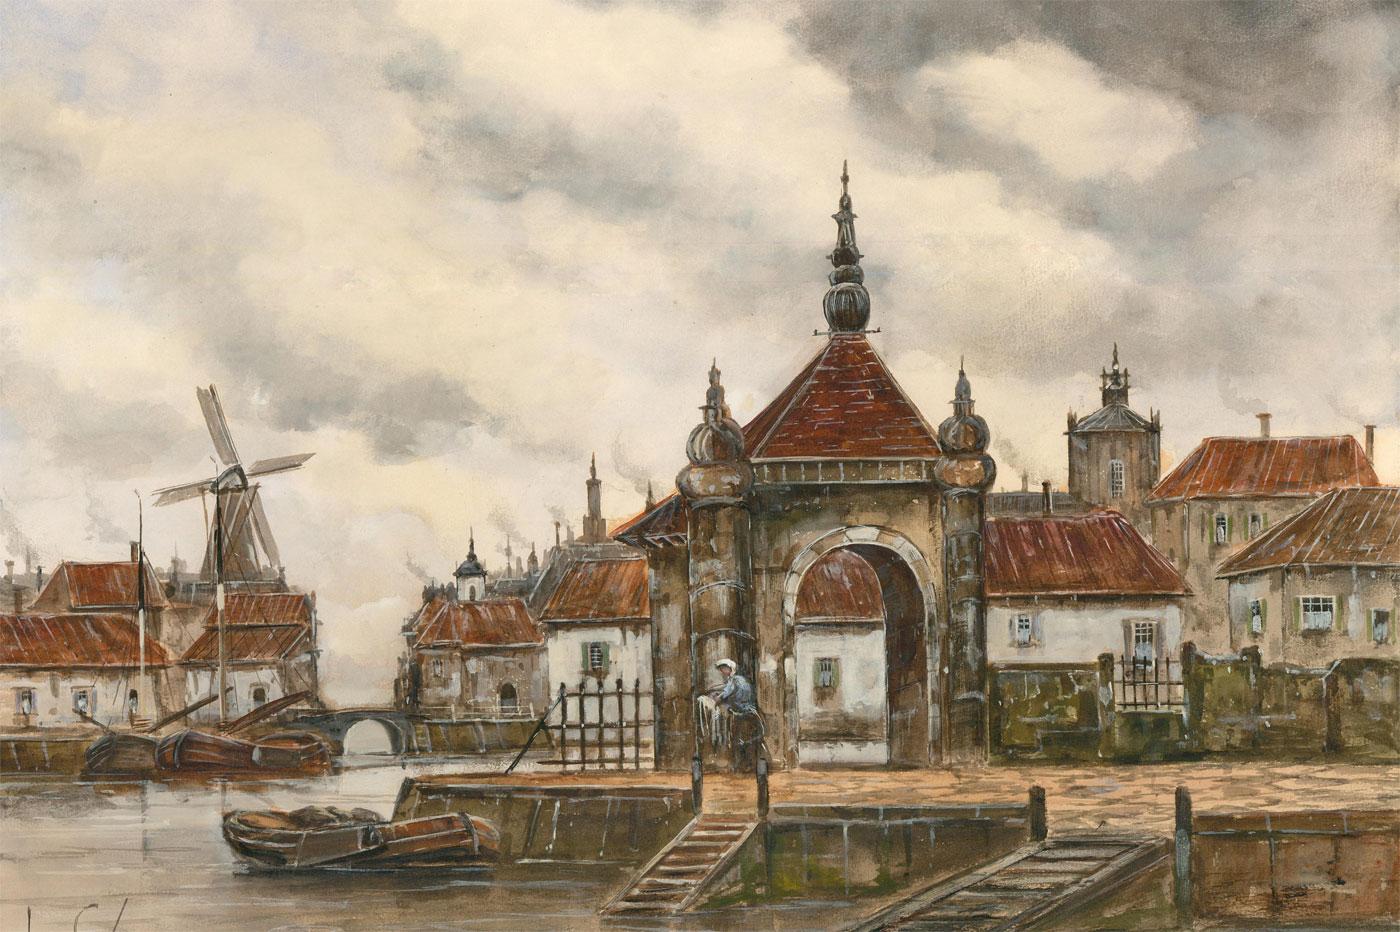 A charming watercolour study depicting moored barges at Rotterdam Old Harbour on a misty morning. The artist captures the classic Dutch architecture lining the water's edge in the foreground with a windmill in the distance. Signed to the lower left.